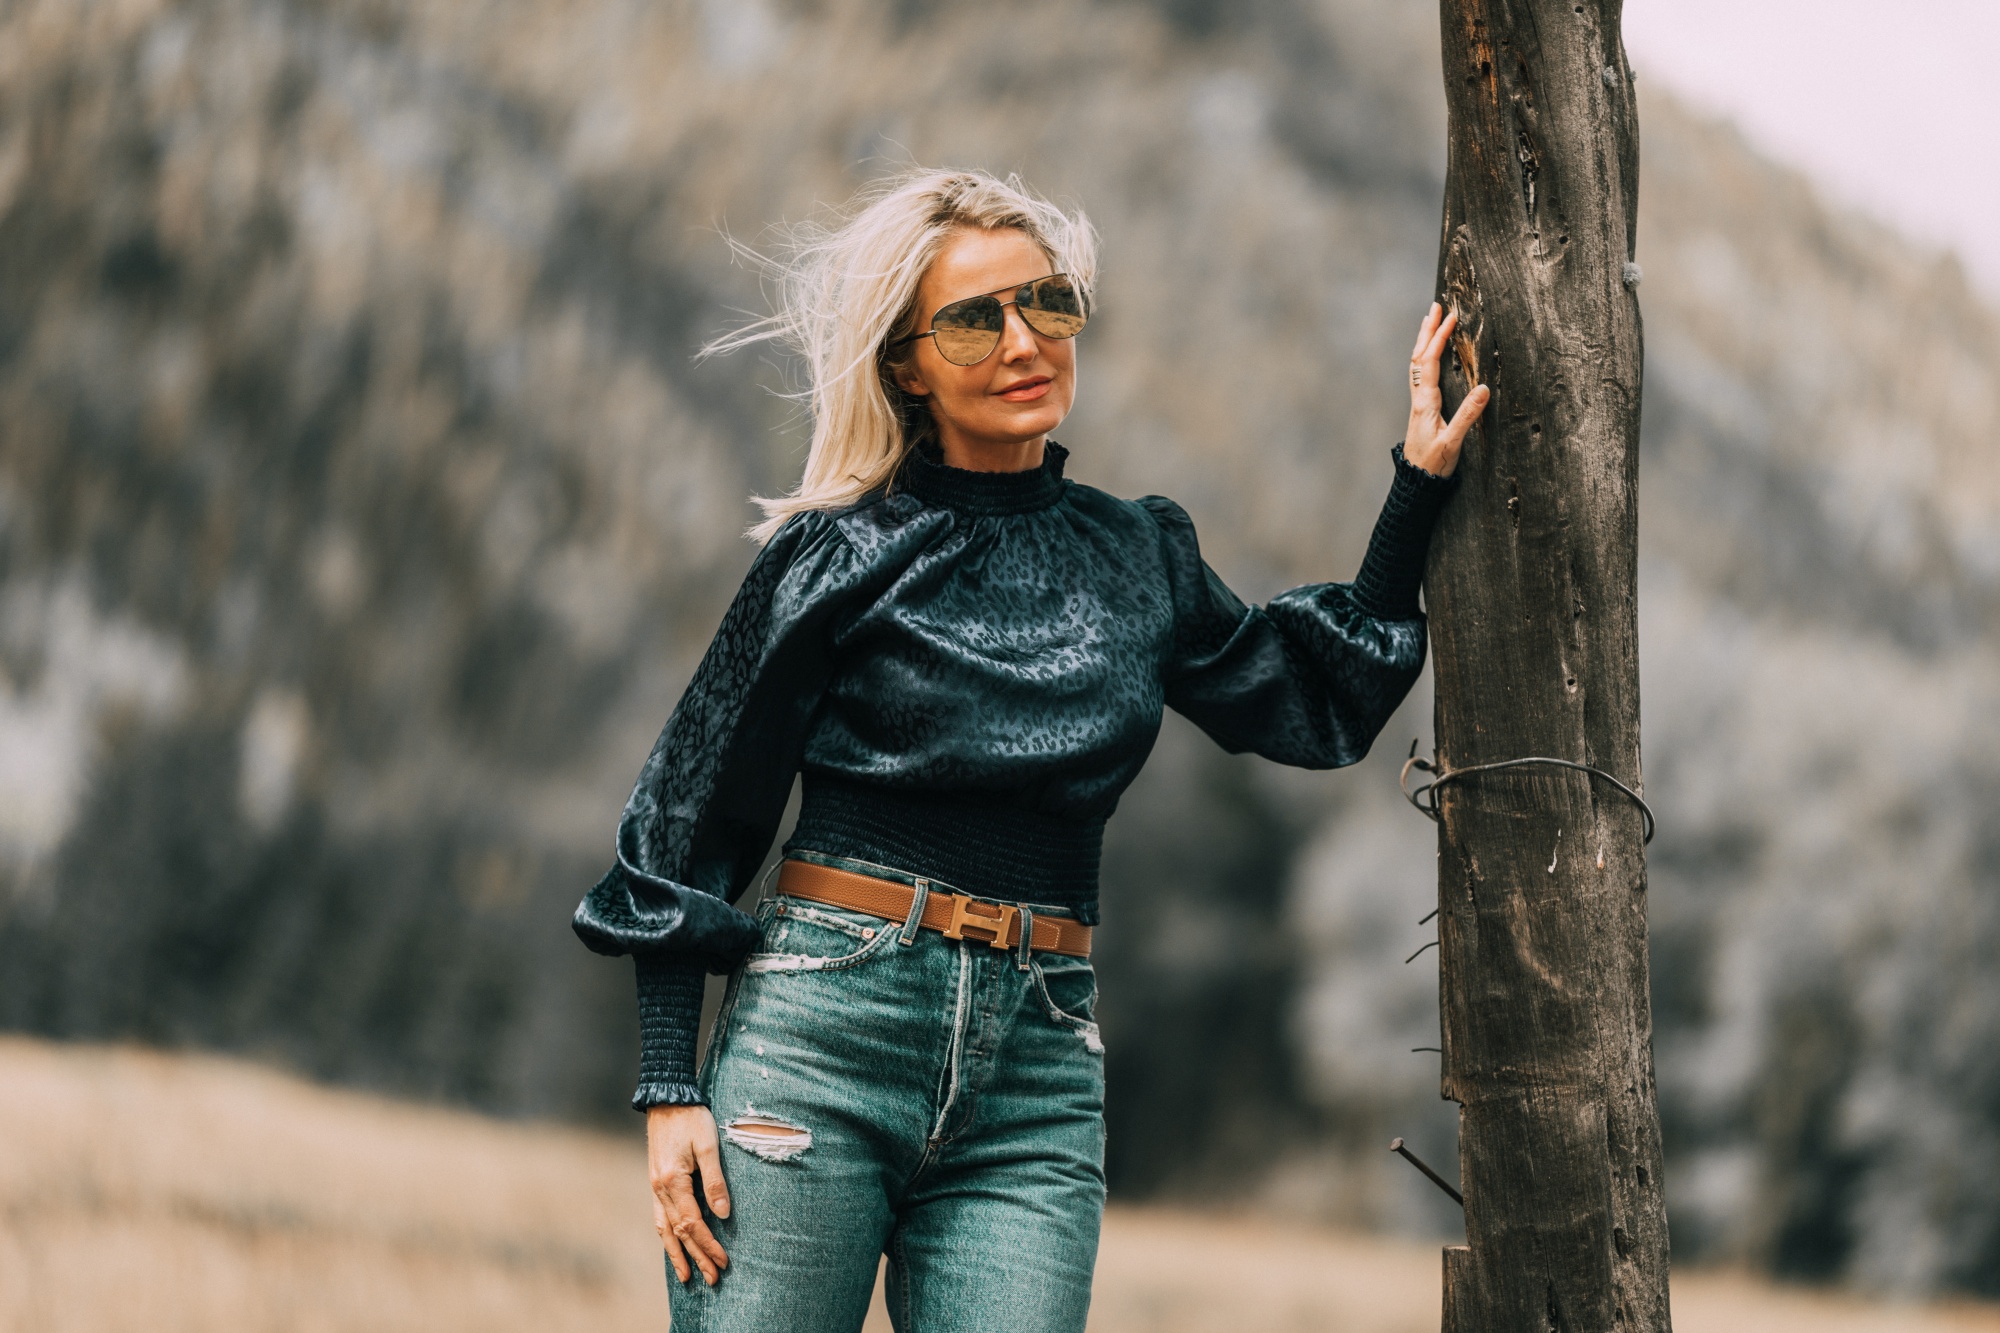 High Neckline Tops, fashion blogger Erin Busbee of BusbeeStyle.com wearing a high neck smocked leopard print blouse by Aqua from Bloomingdale's with agolde baggy jeans, hermes belt, and neutral booties in Telluride, CO